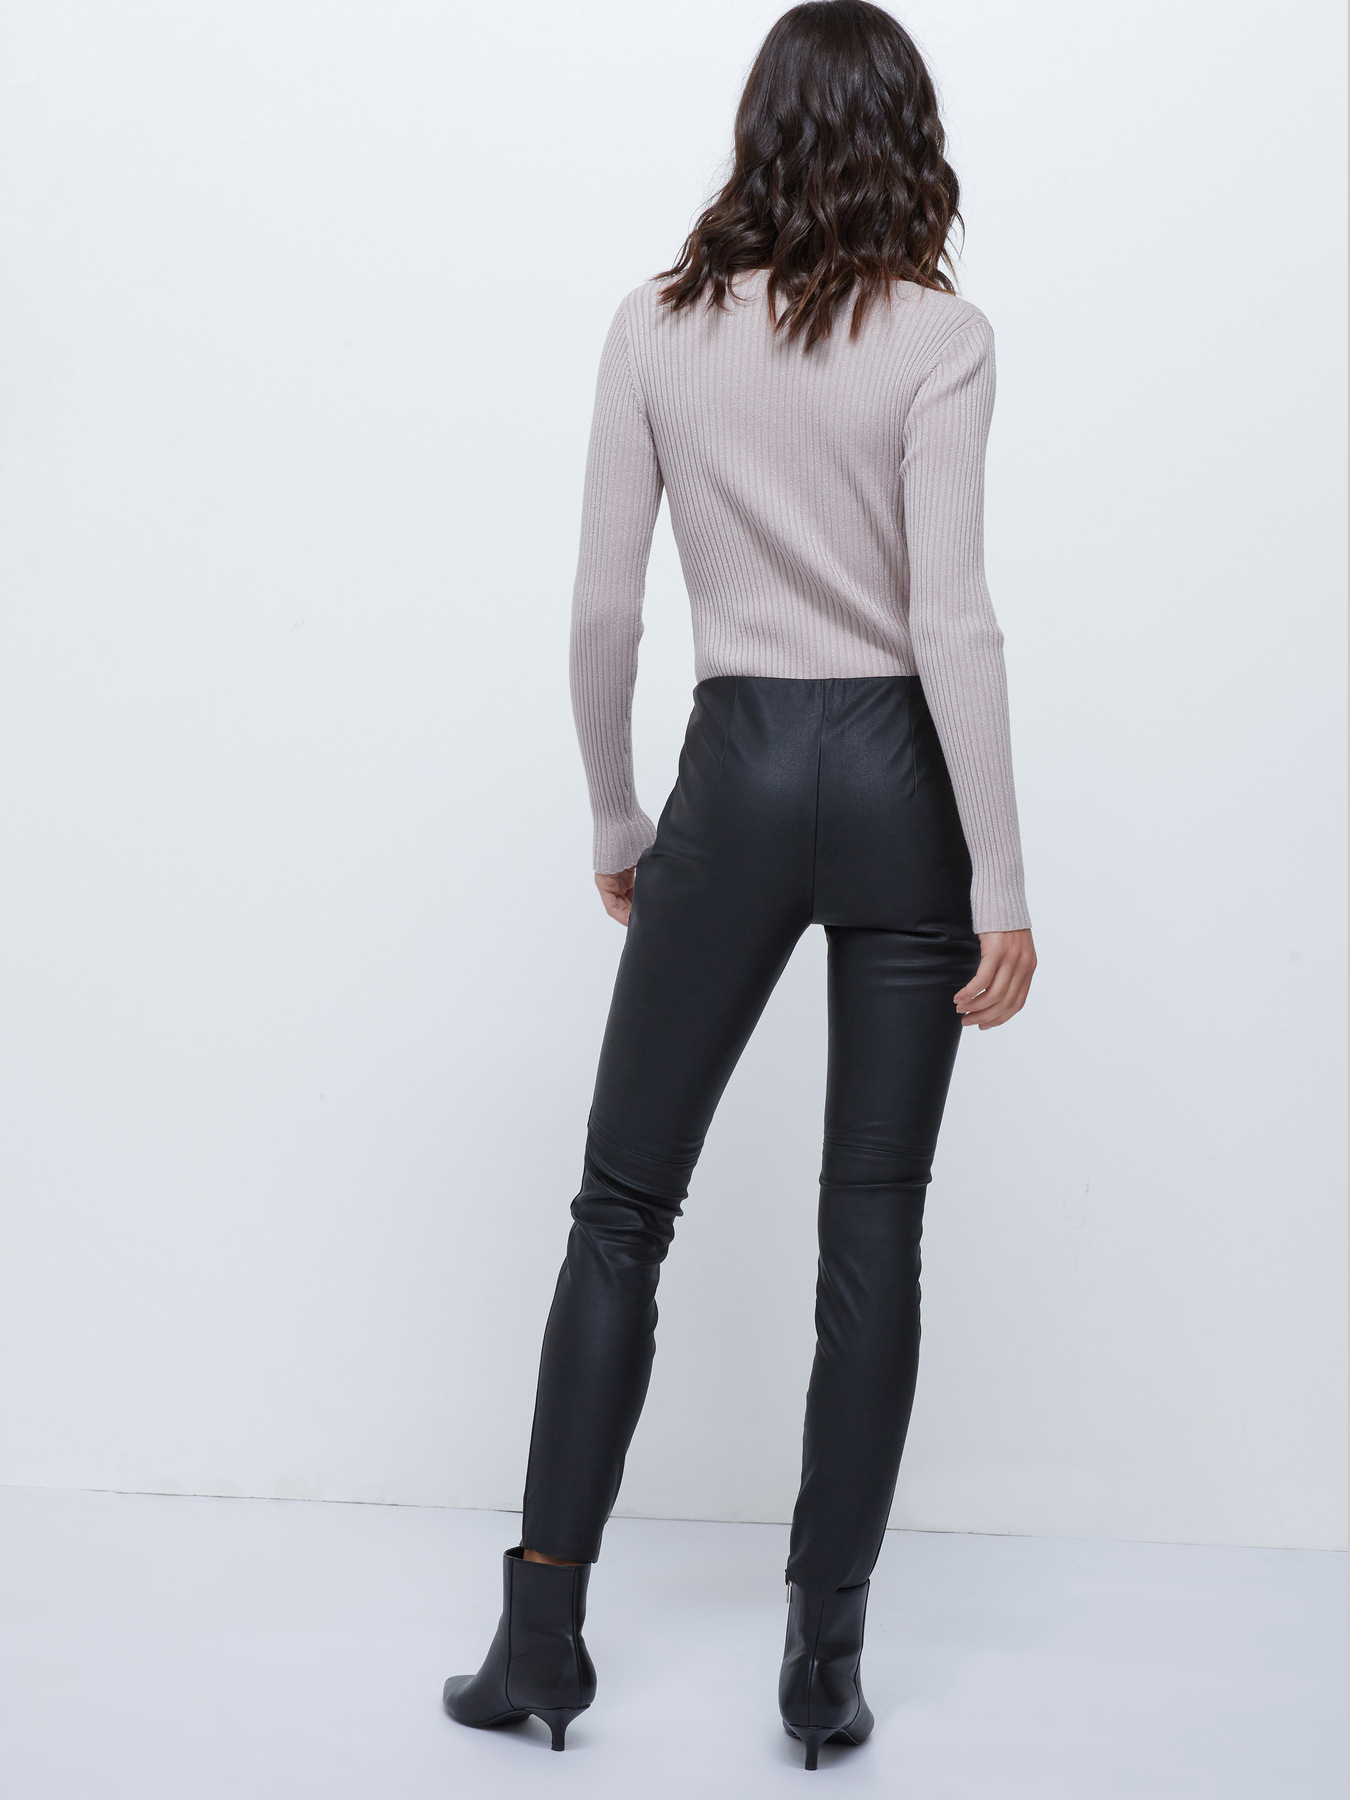 Missguided Agnes Faux Leather Zip Detail Skinny Trousers Black, $60 |  Missguided | Lookastic